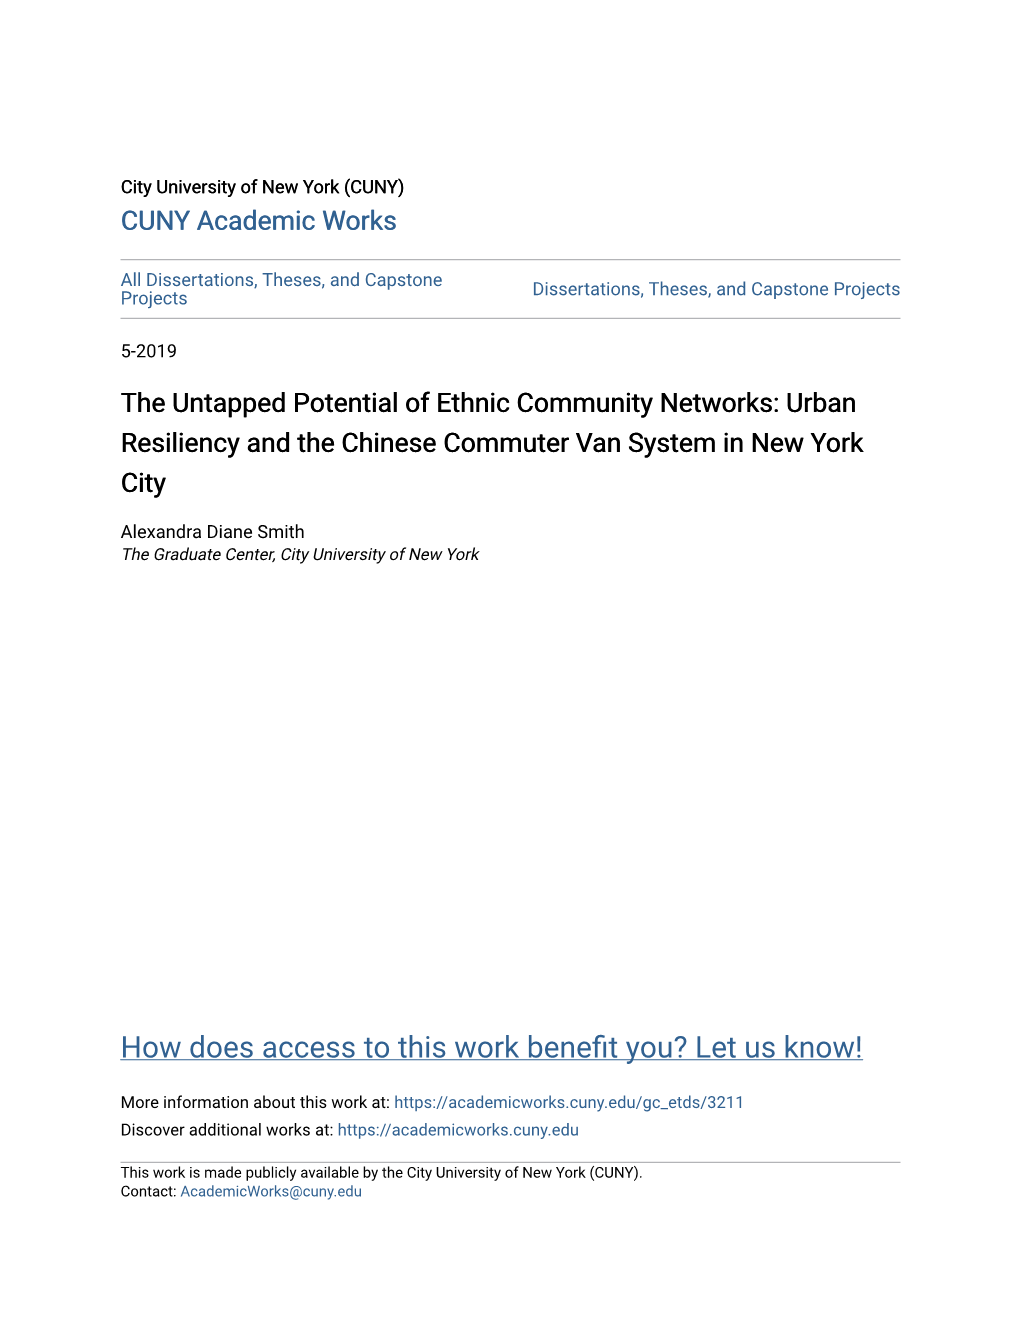 Urban Resiliency and the Chinese Commuter Van System in New York City